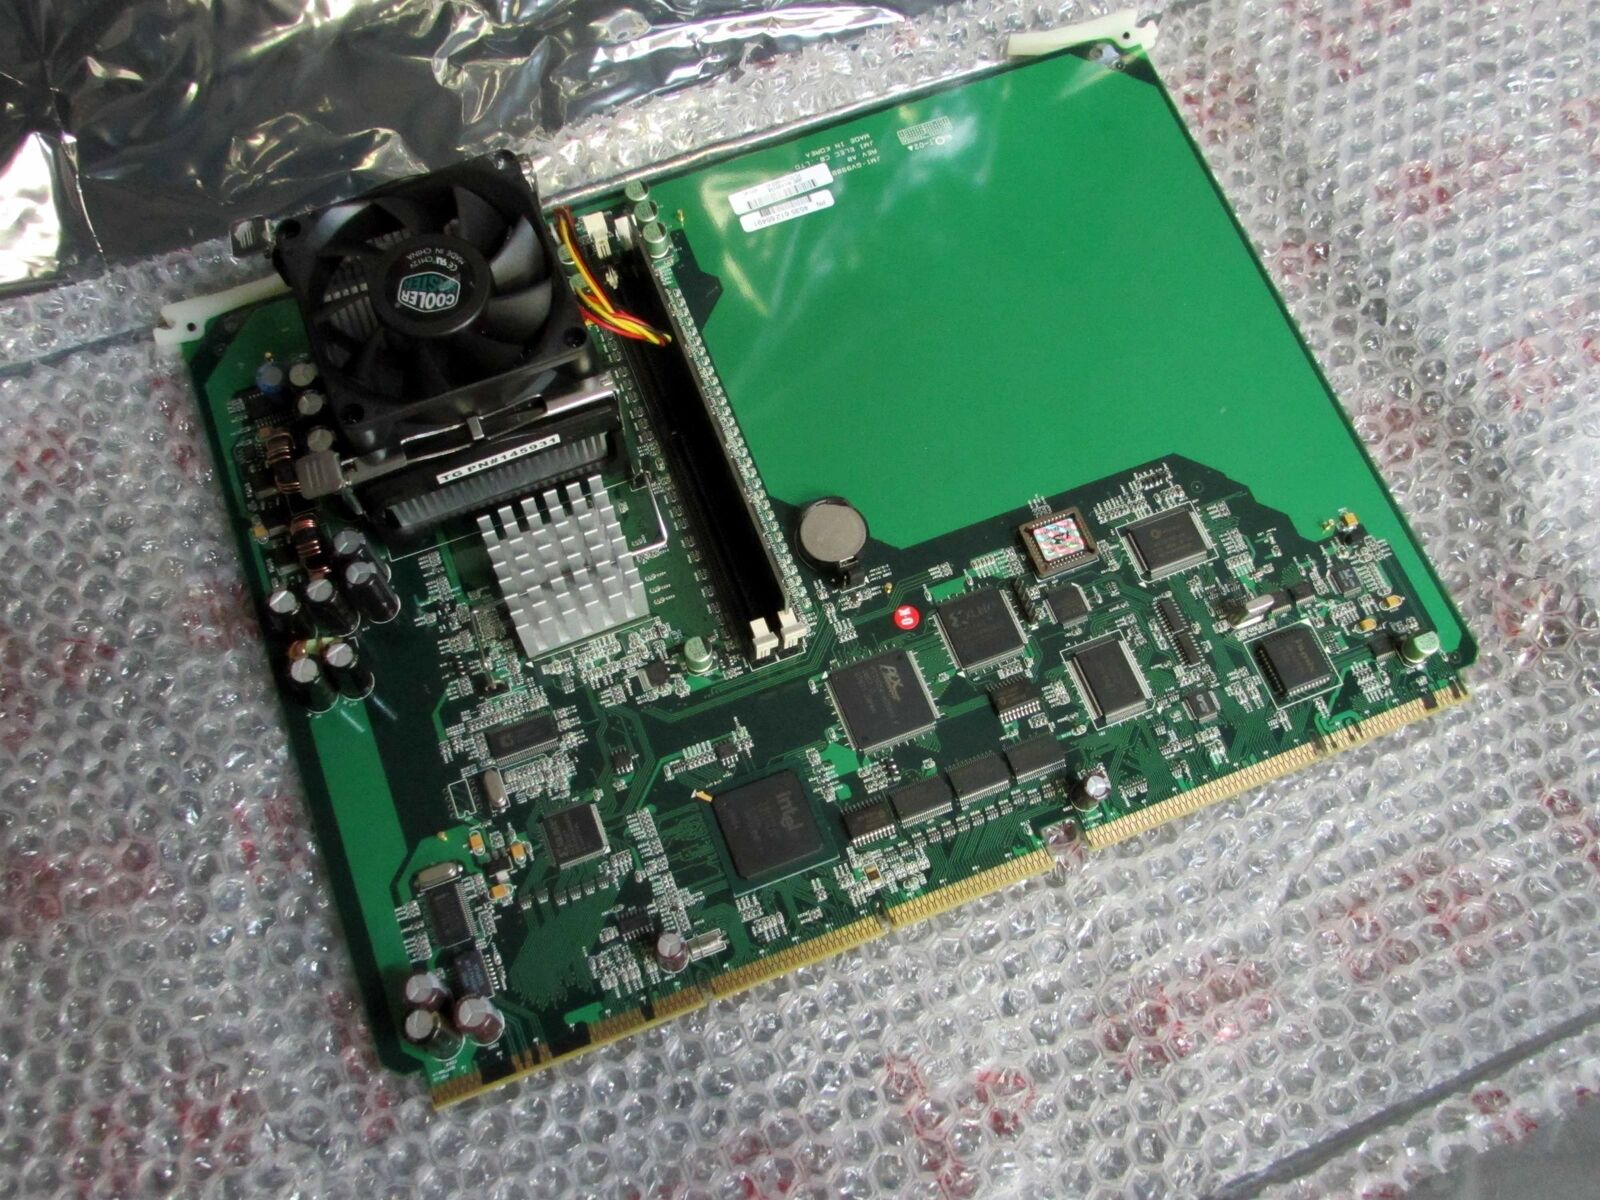 * NEW PHILIPS/ATL HDI 4000 ULTRASOUND MOTHERBOARD 4535-612-65491 DIAGNOSTIC ULTRASOUND MACHINES FOR SALE